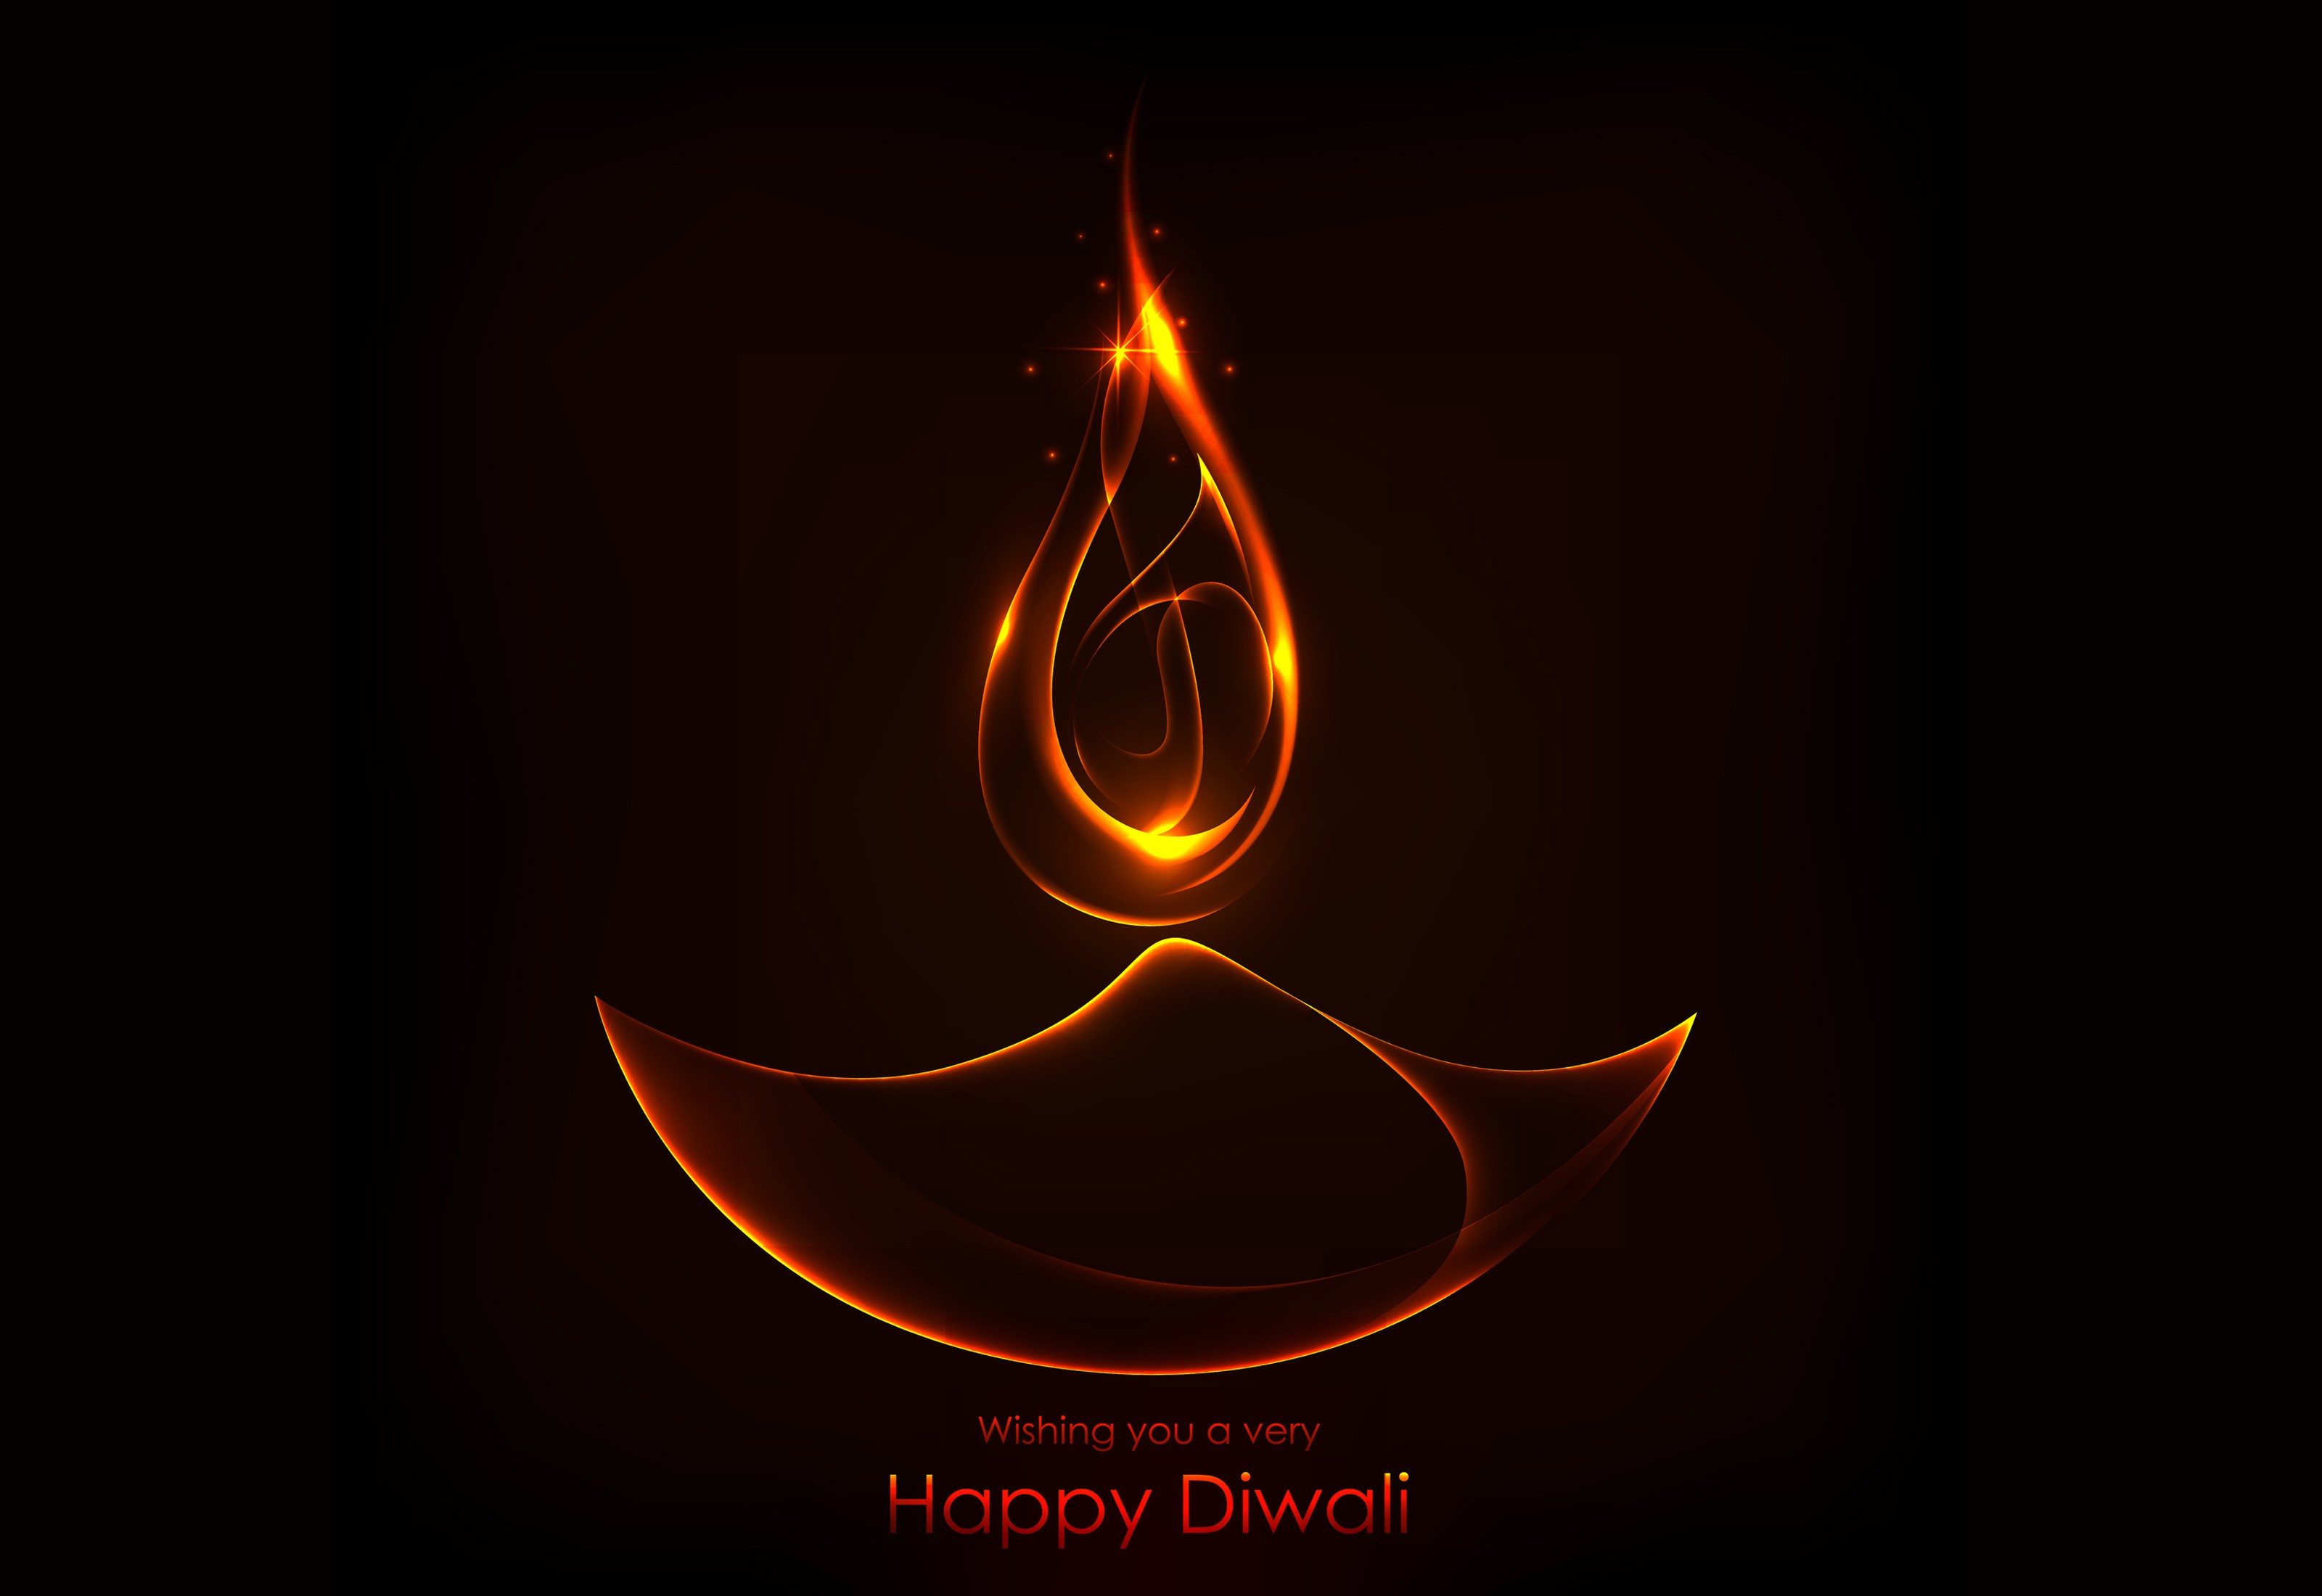 Diwali Special Images Wallpapers 2017 Collection Picture Whatsapp Image Download